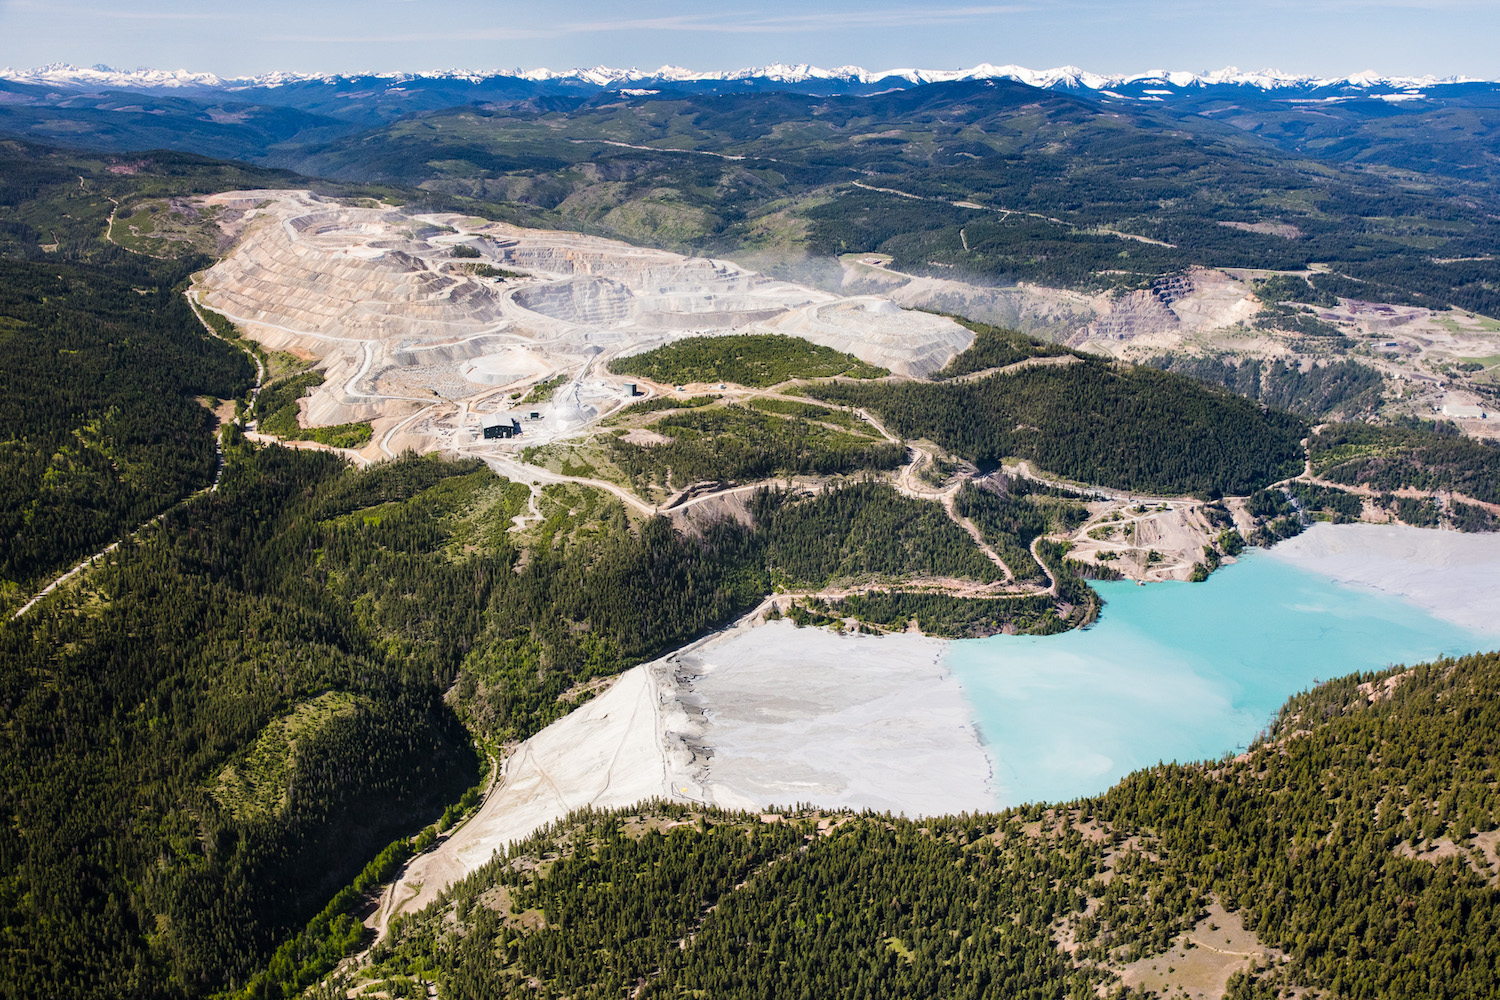 Above: Copper Mountain mine in British Columbia, looking south toward the United States border. Similar mining projects have been proposed for an area in Washington's Methow Valley. Photo by Benjamin Drummond / Methow Headwaters Campaign. Aerial support by LightHawk